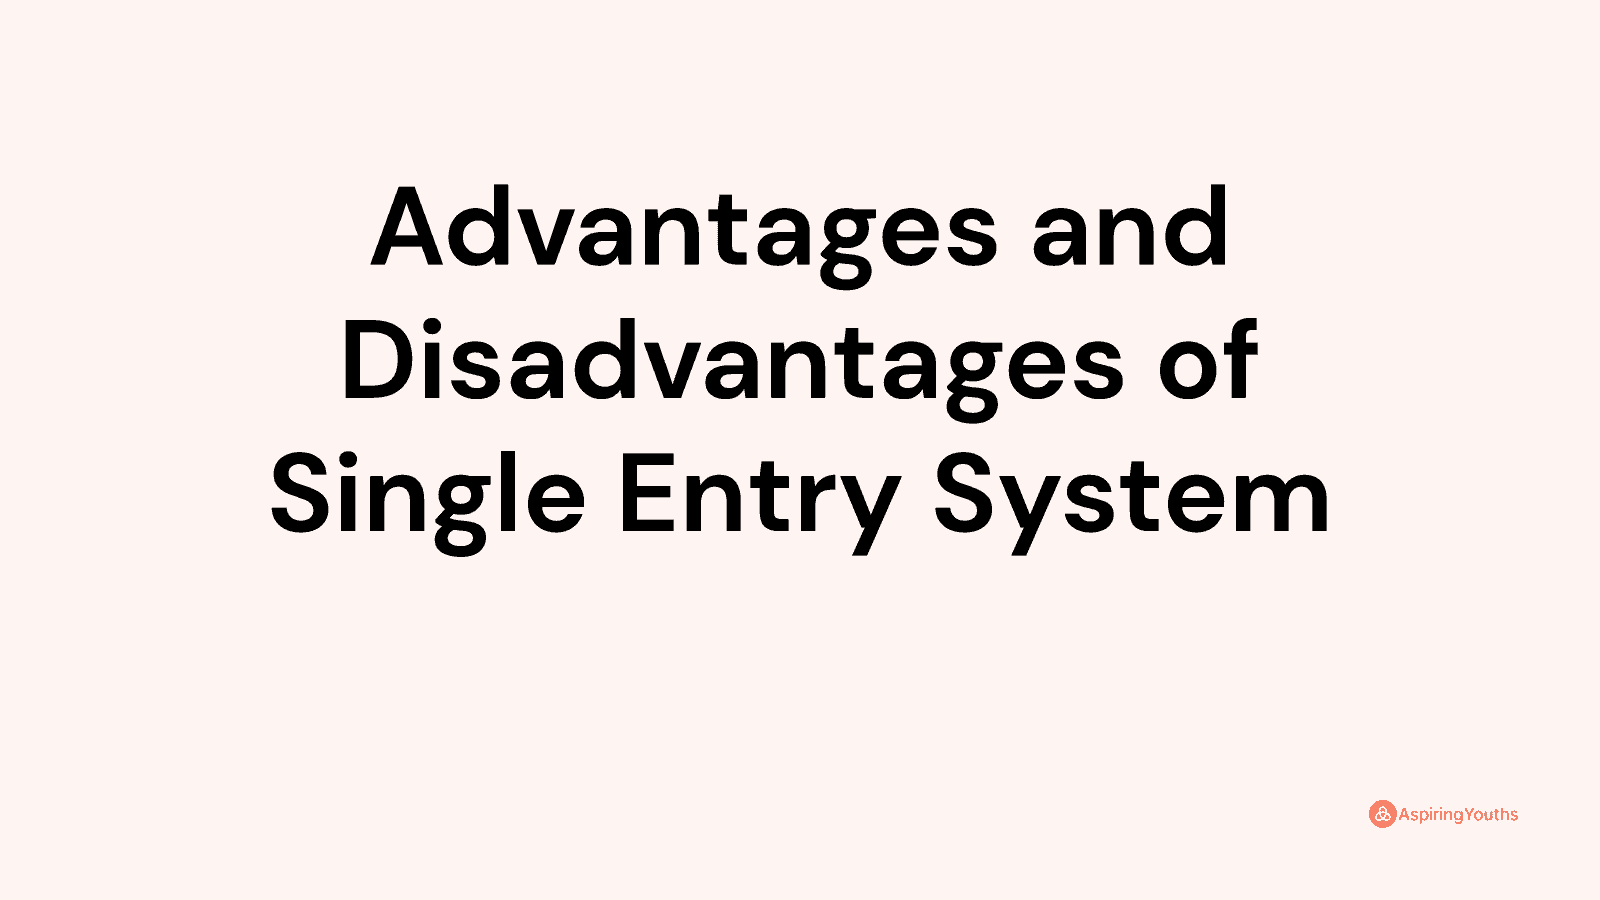 Advantages and disadvantages of Single Entry System